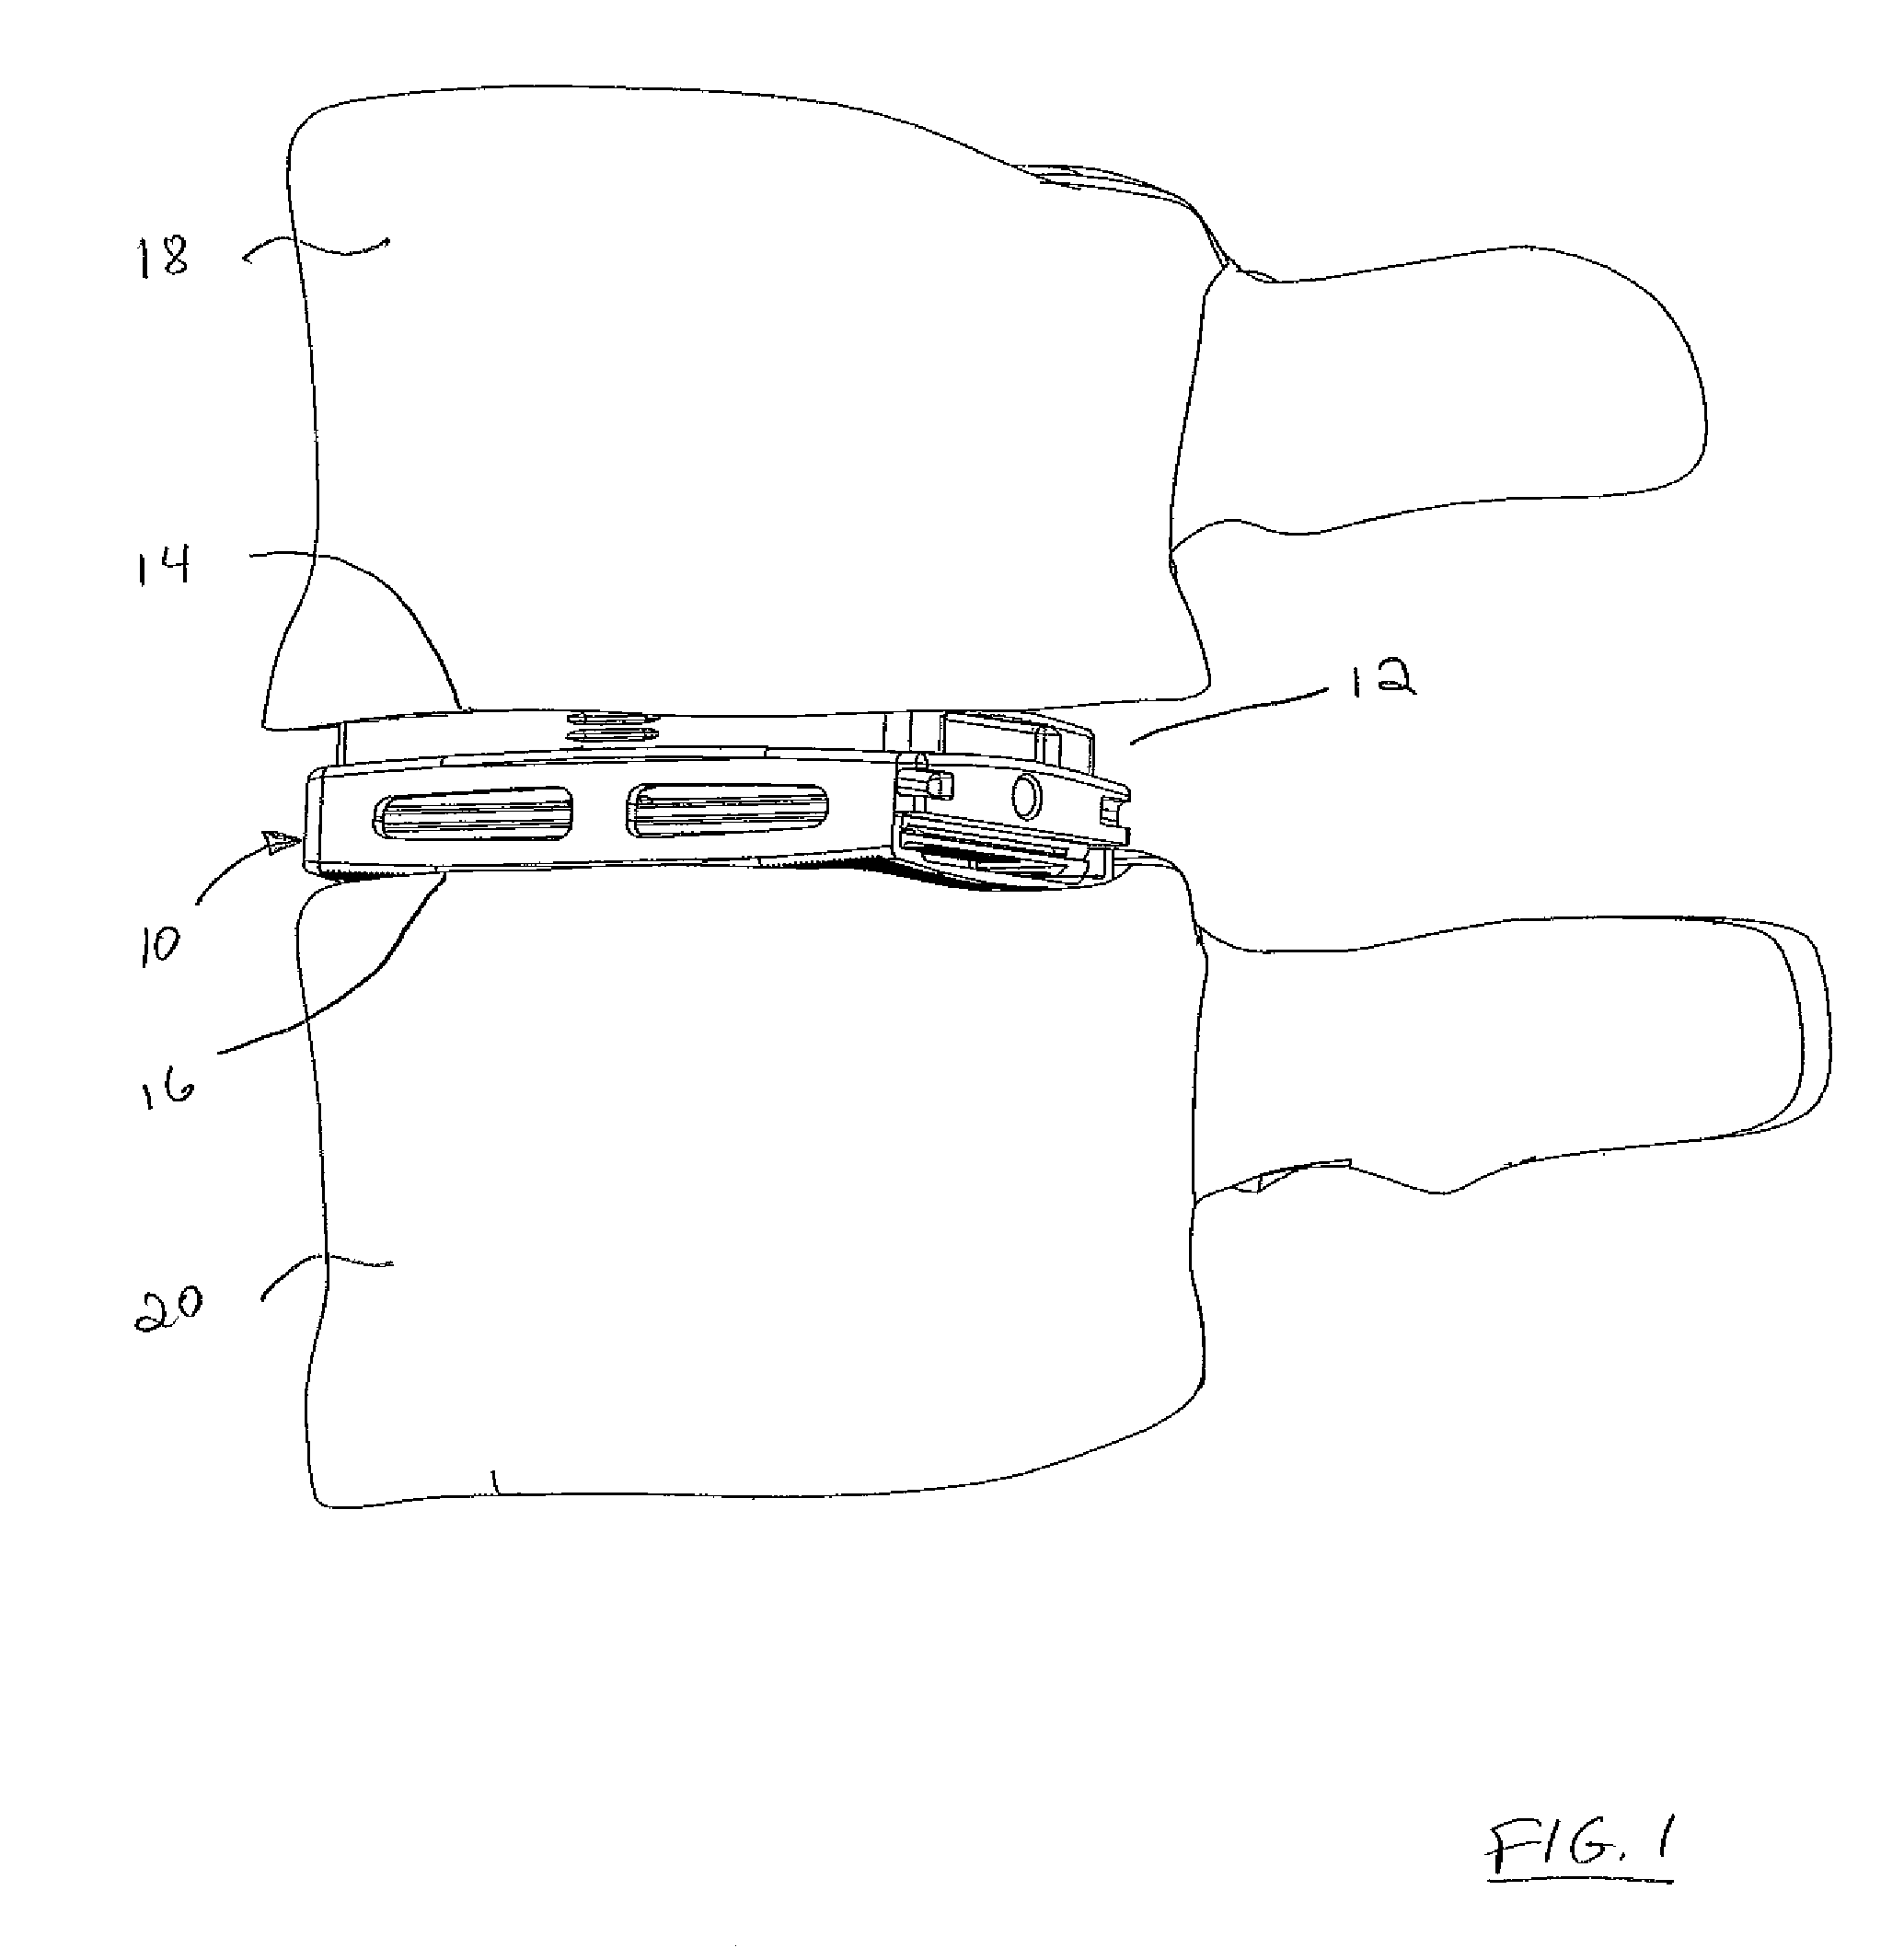 Method of expanding an intradiscal space and providing an osteoconductive path during expansion